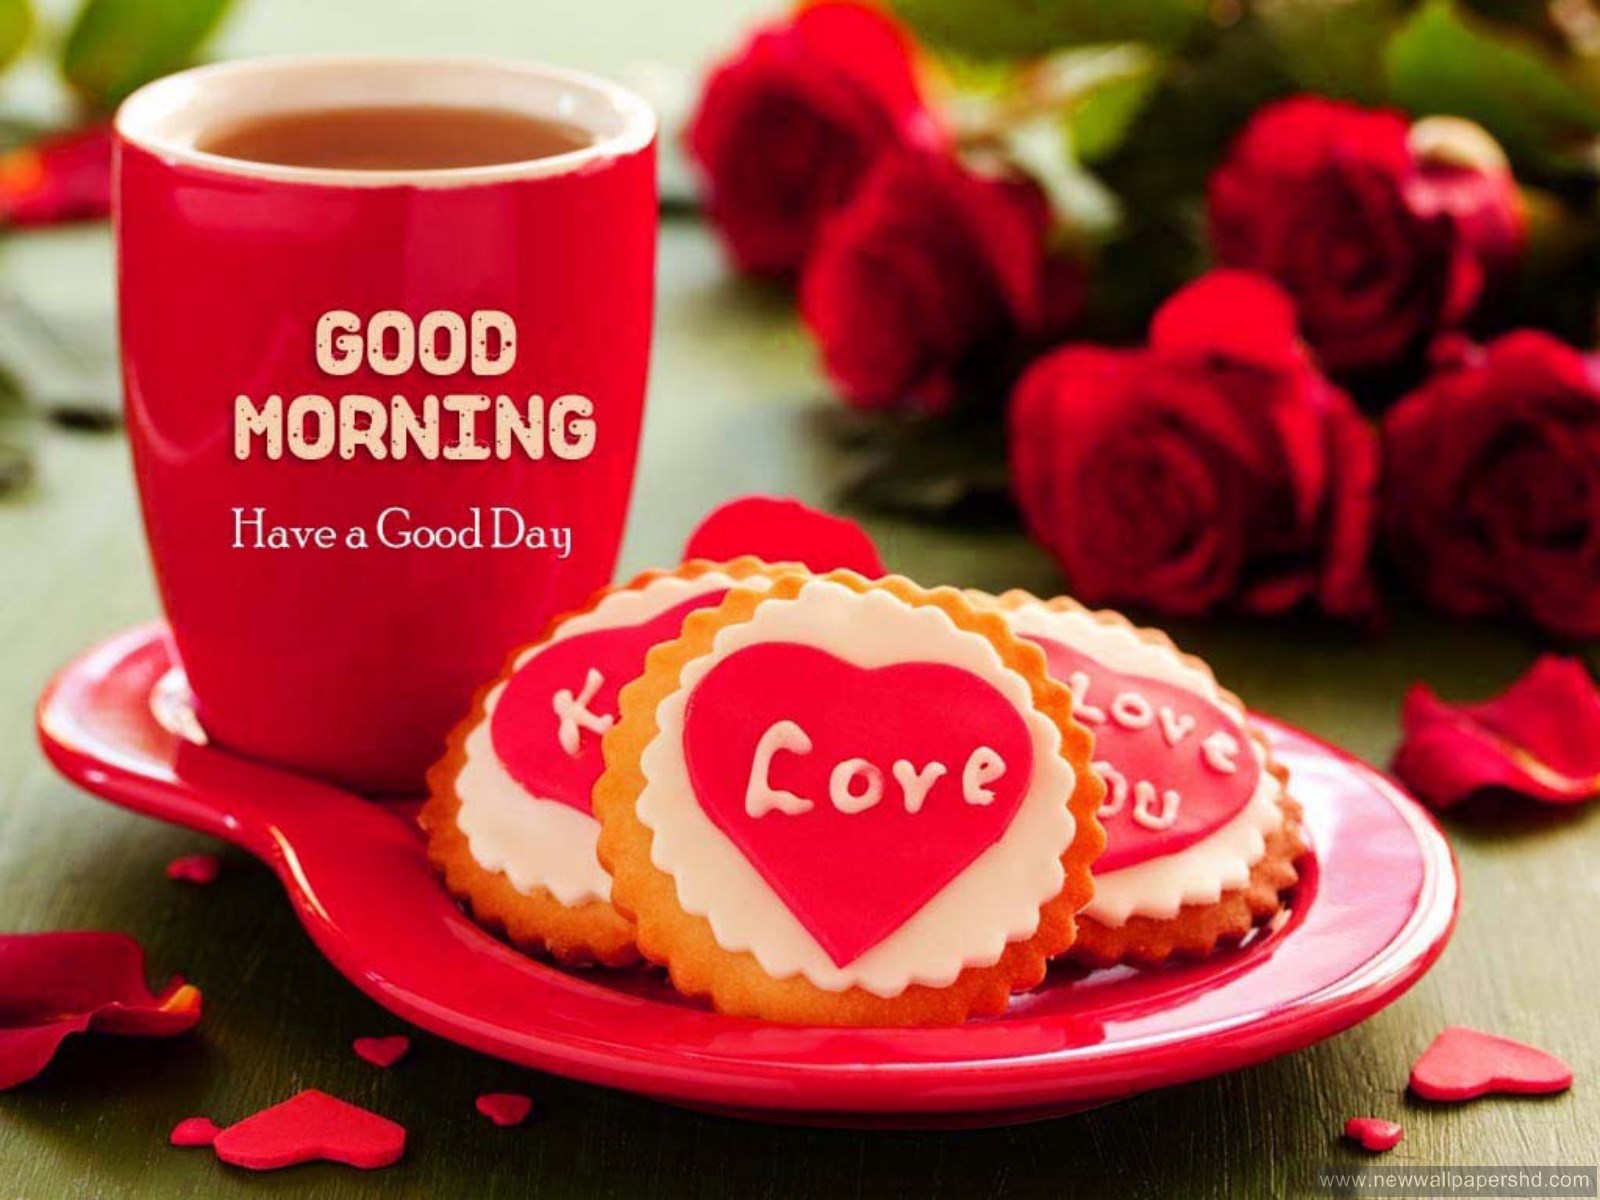 Download free images of good morning sms